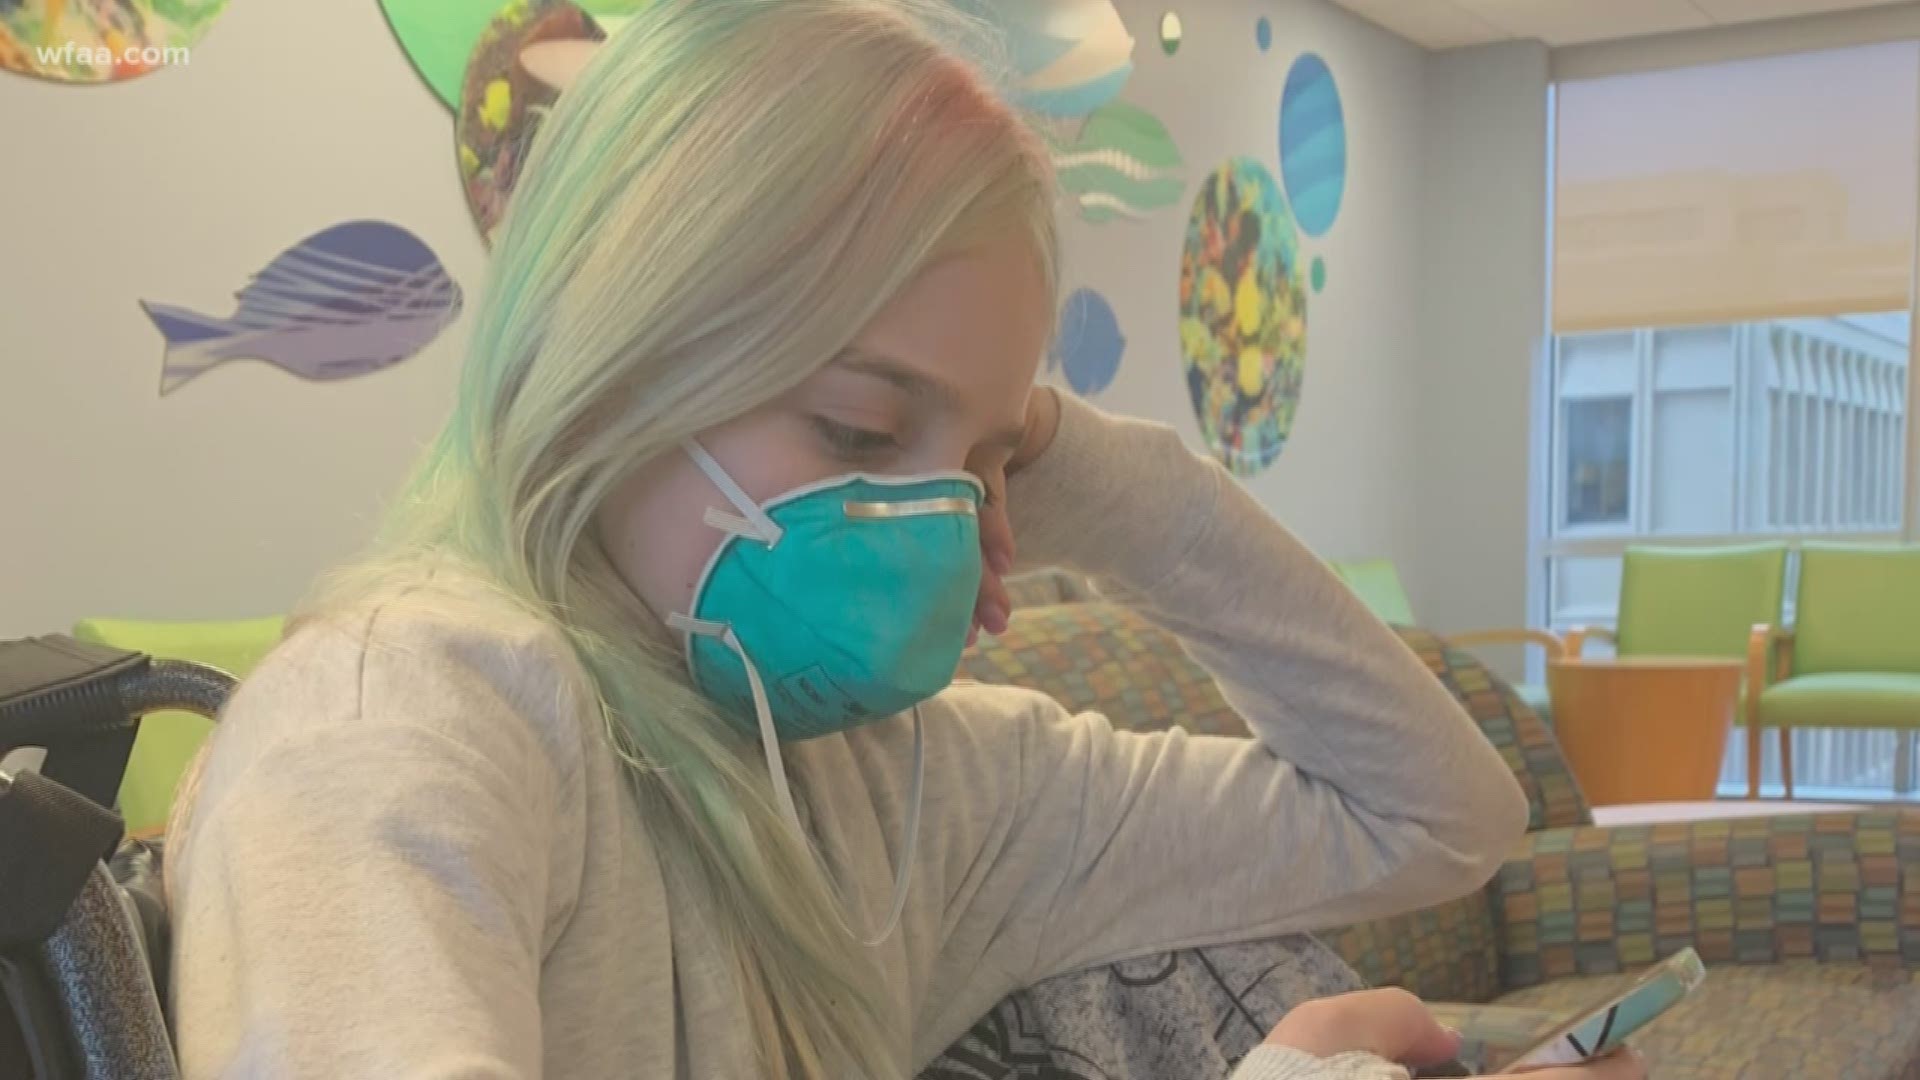 "We have two masks at home and that's it. And when they handed it to us after her first chemo treatment, they said handle it like gold," said Christine Martin.